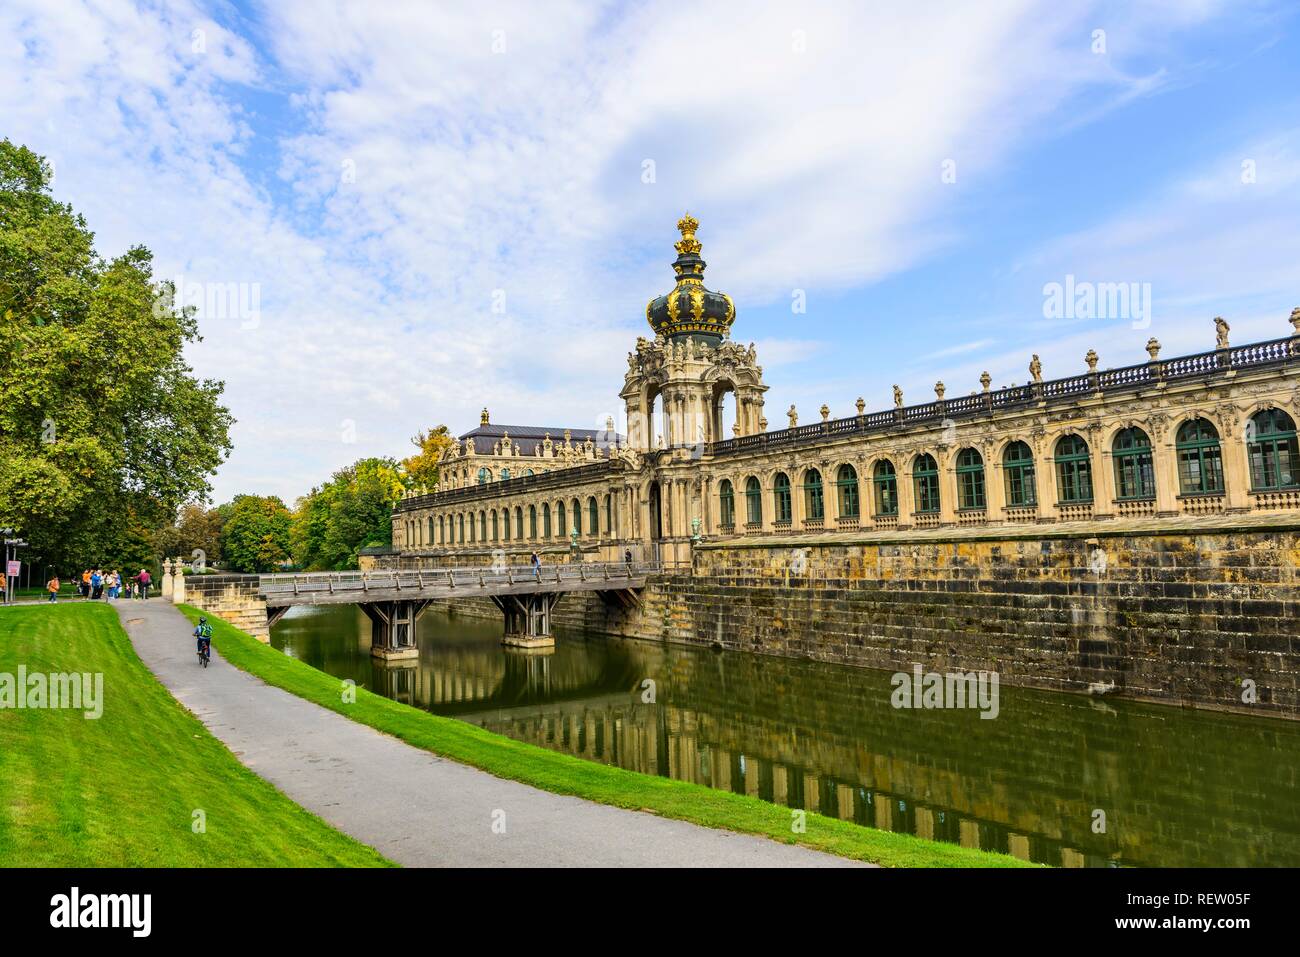 Exterior view of the Kronentor, Langgalerie and Wassergraben, Zwinger, Dresden, Saxony, Germany Stock Photo